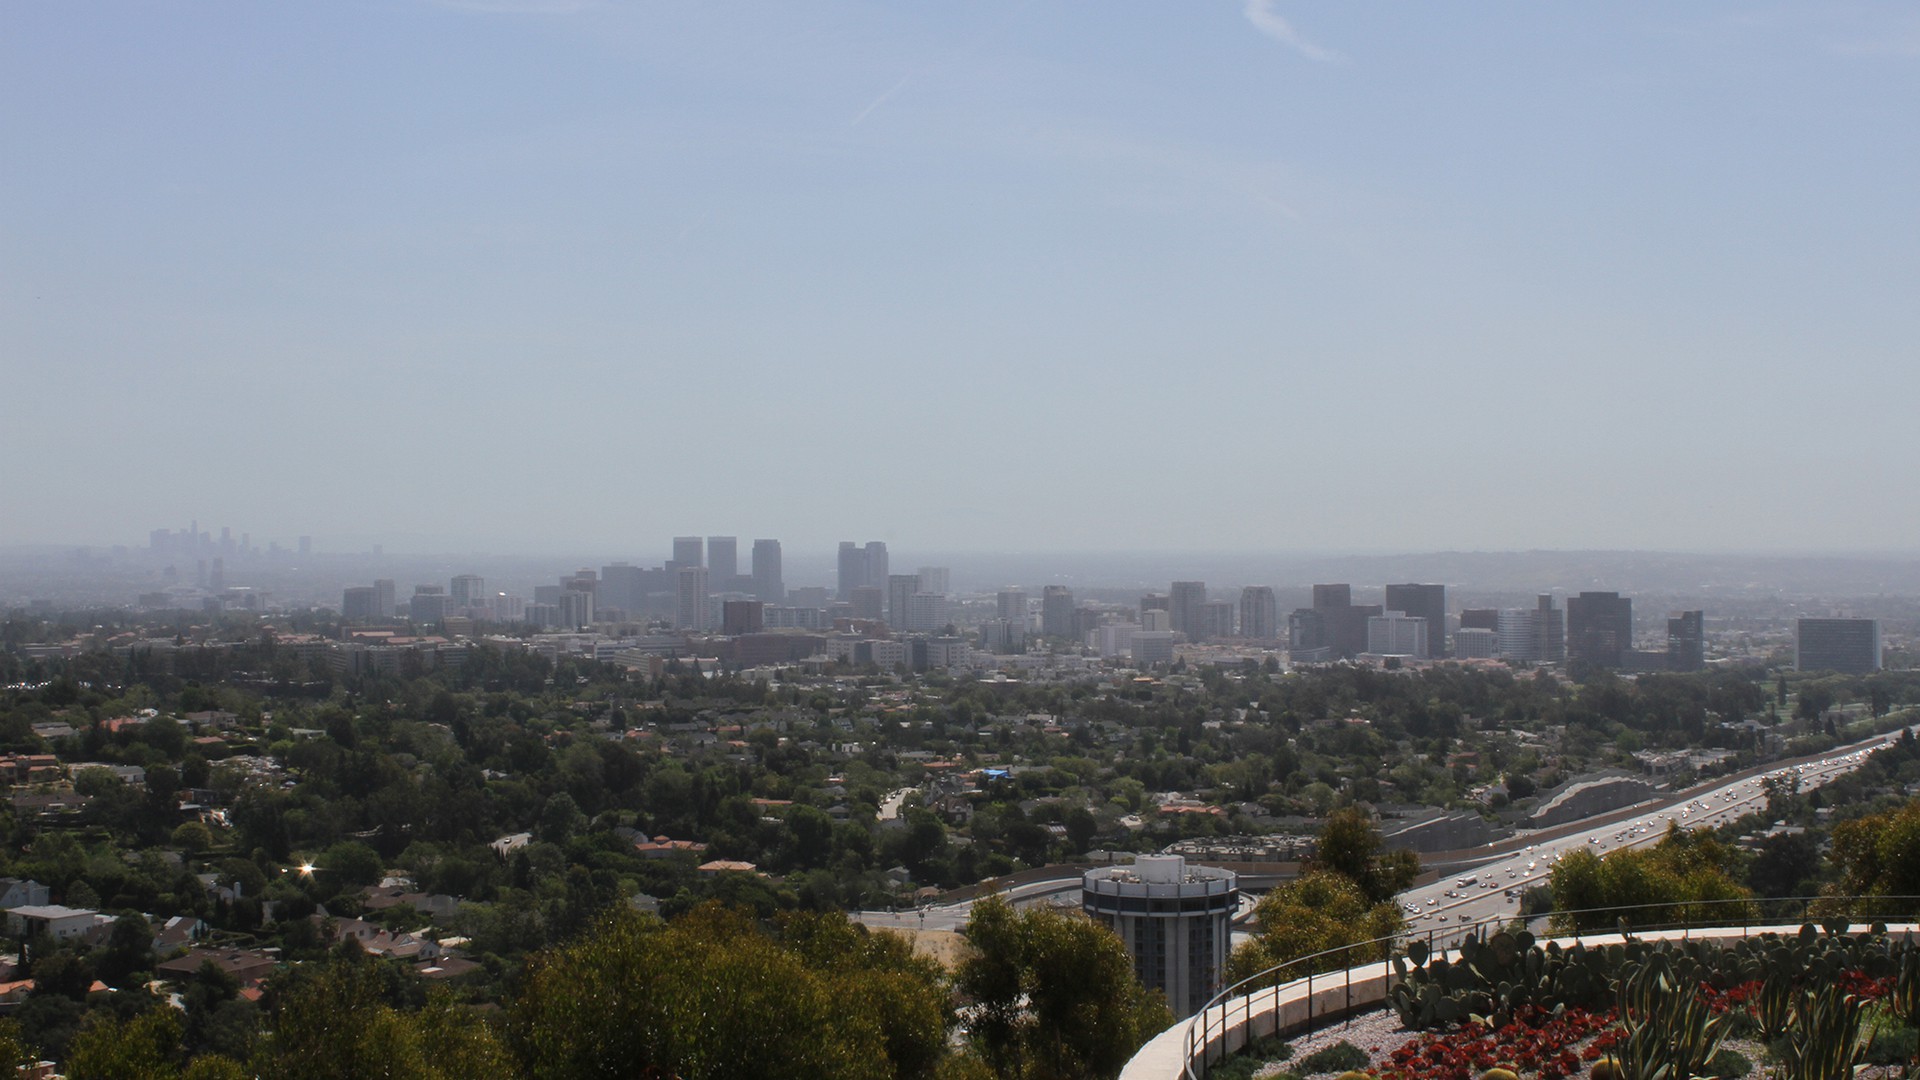 A haze over the Los Angeles skyline. Agreements between California and Mexico aim to reduce carbon emissions while preserving forests and protecting indigenous people. (Photo by Carolina Lopez.)